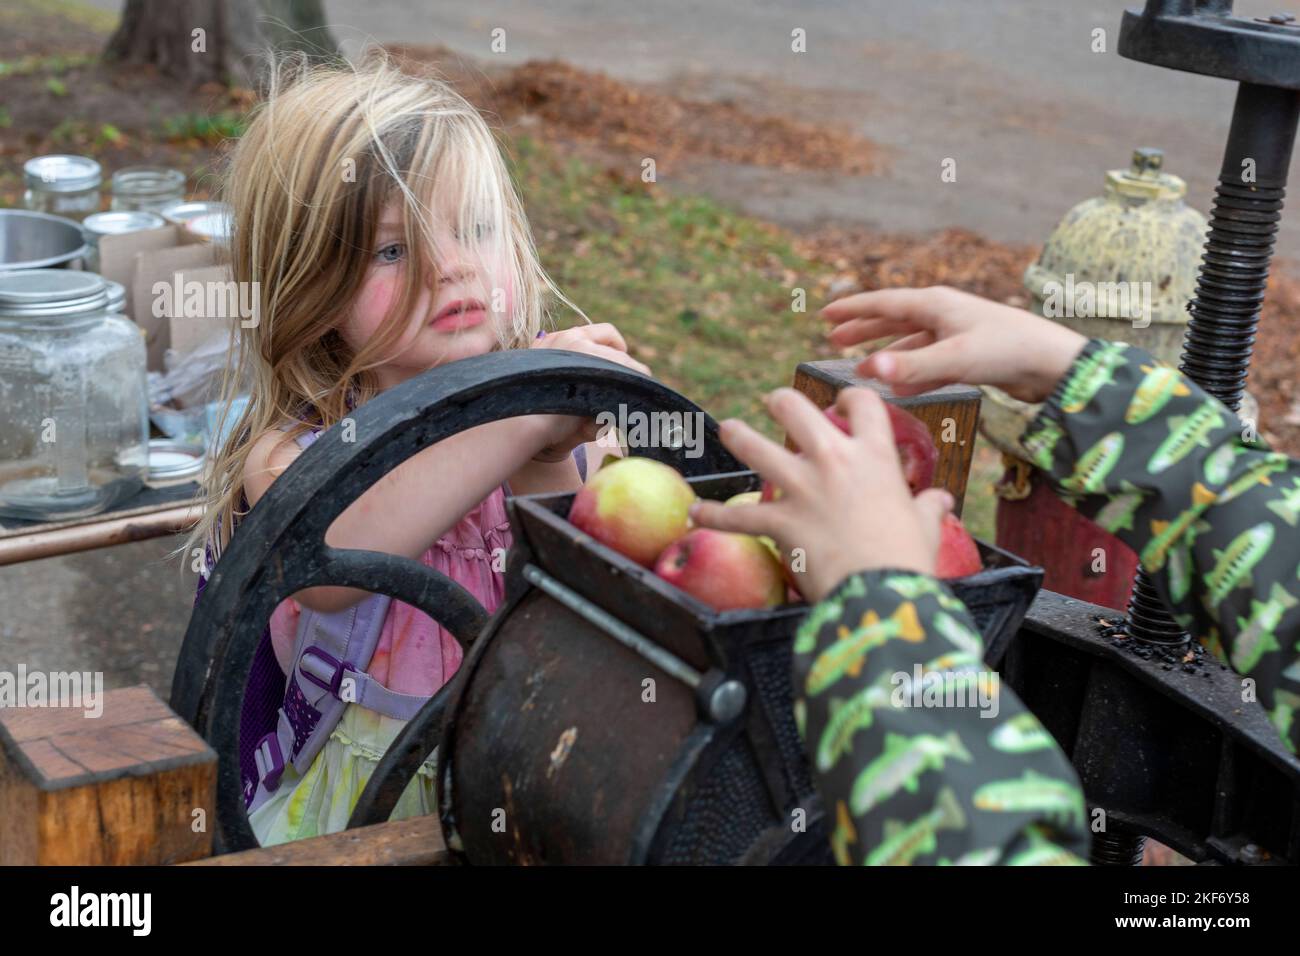 Detroit, Michigan - Children make apple cider with an apple press at a fall festival on the near east side of Detroit. Stock Photo